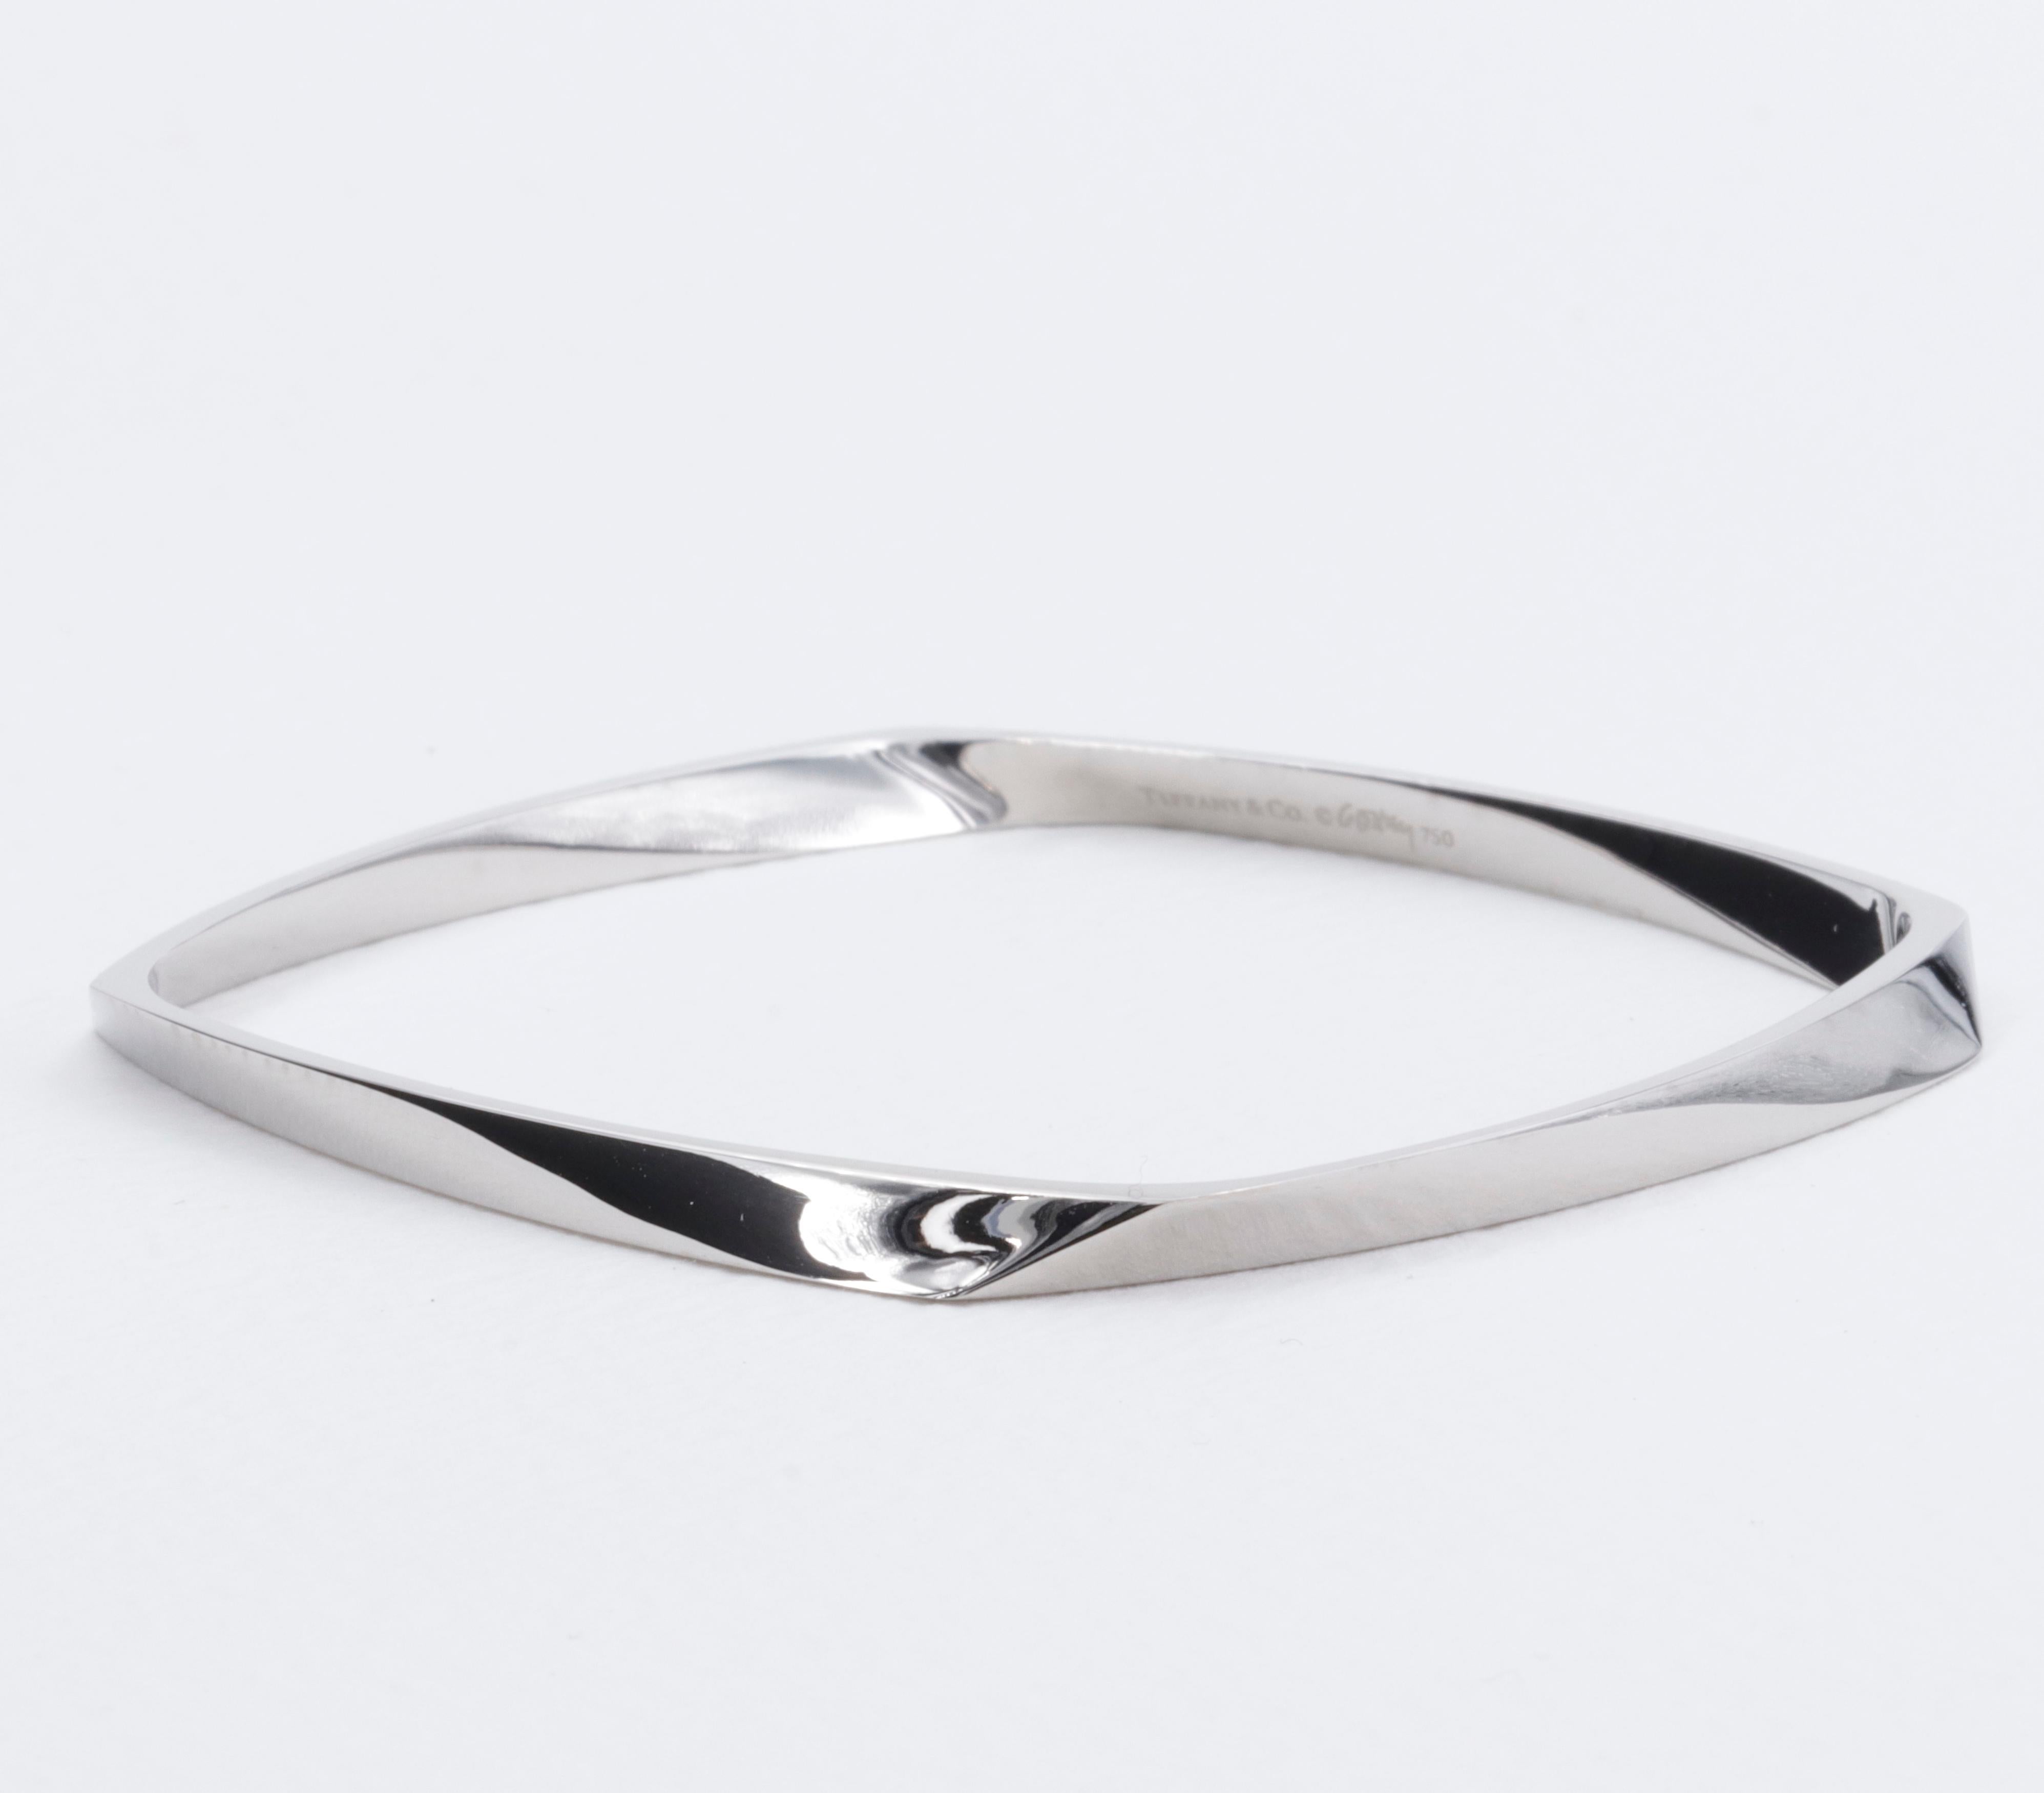 Tiffany & Co. Frank Gehry Torque Bangle Bracelet in 18 Karat White Gold  In Excellent Condition For Sale In Tampa, FL